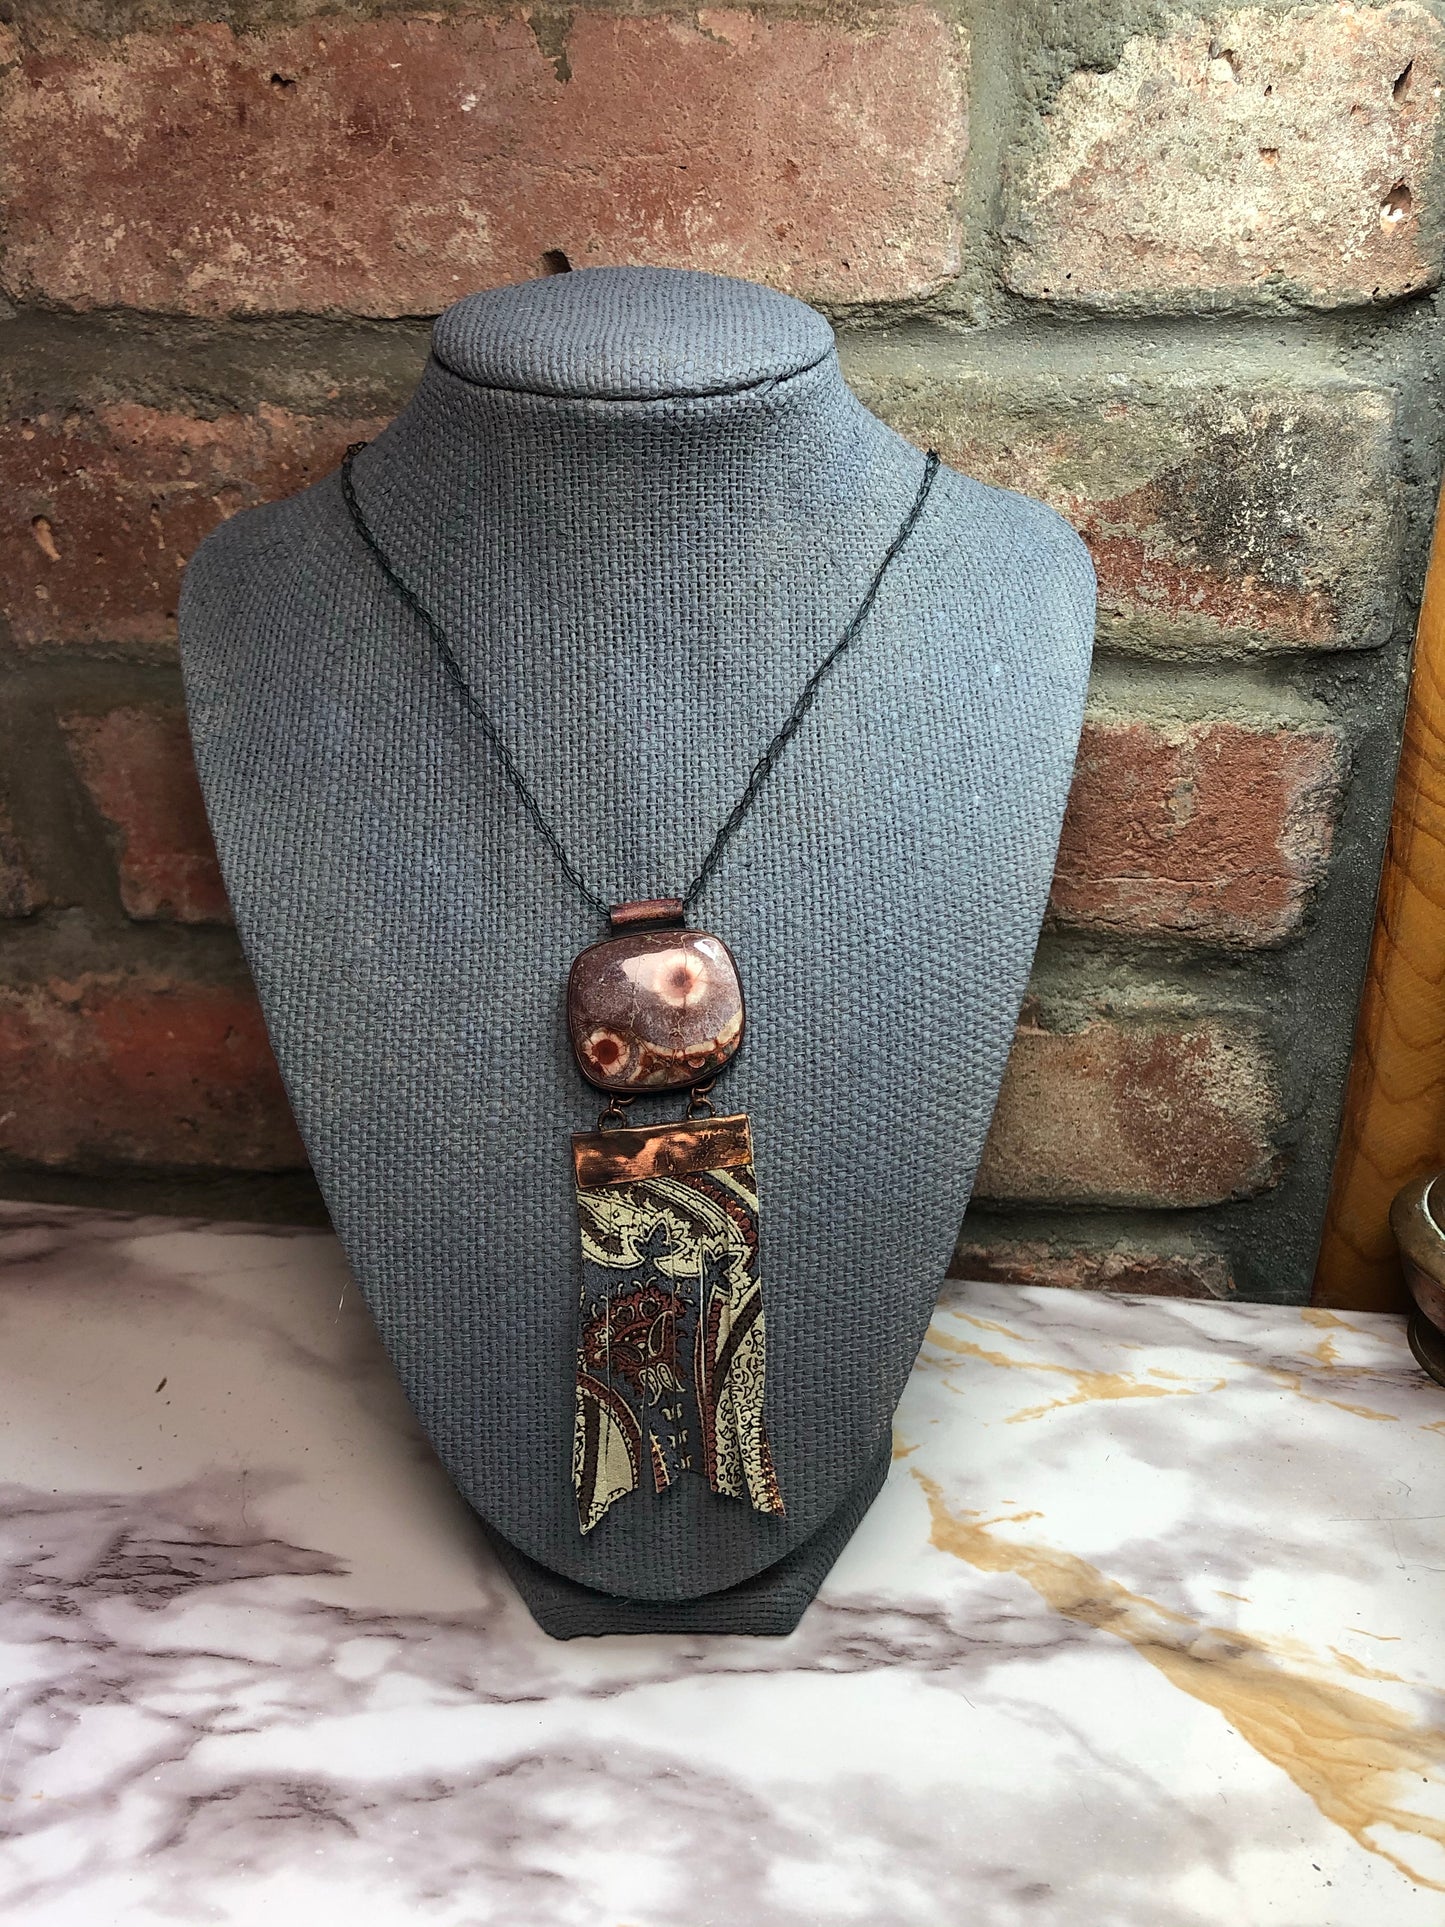 Copper, Birdseye rhyolite, and embossed leather necklace